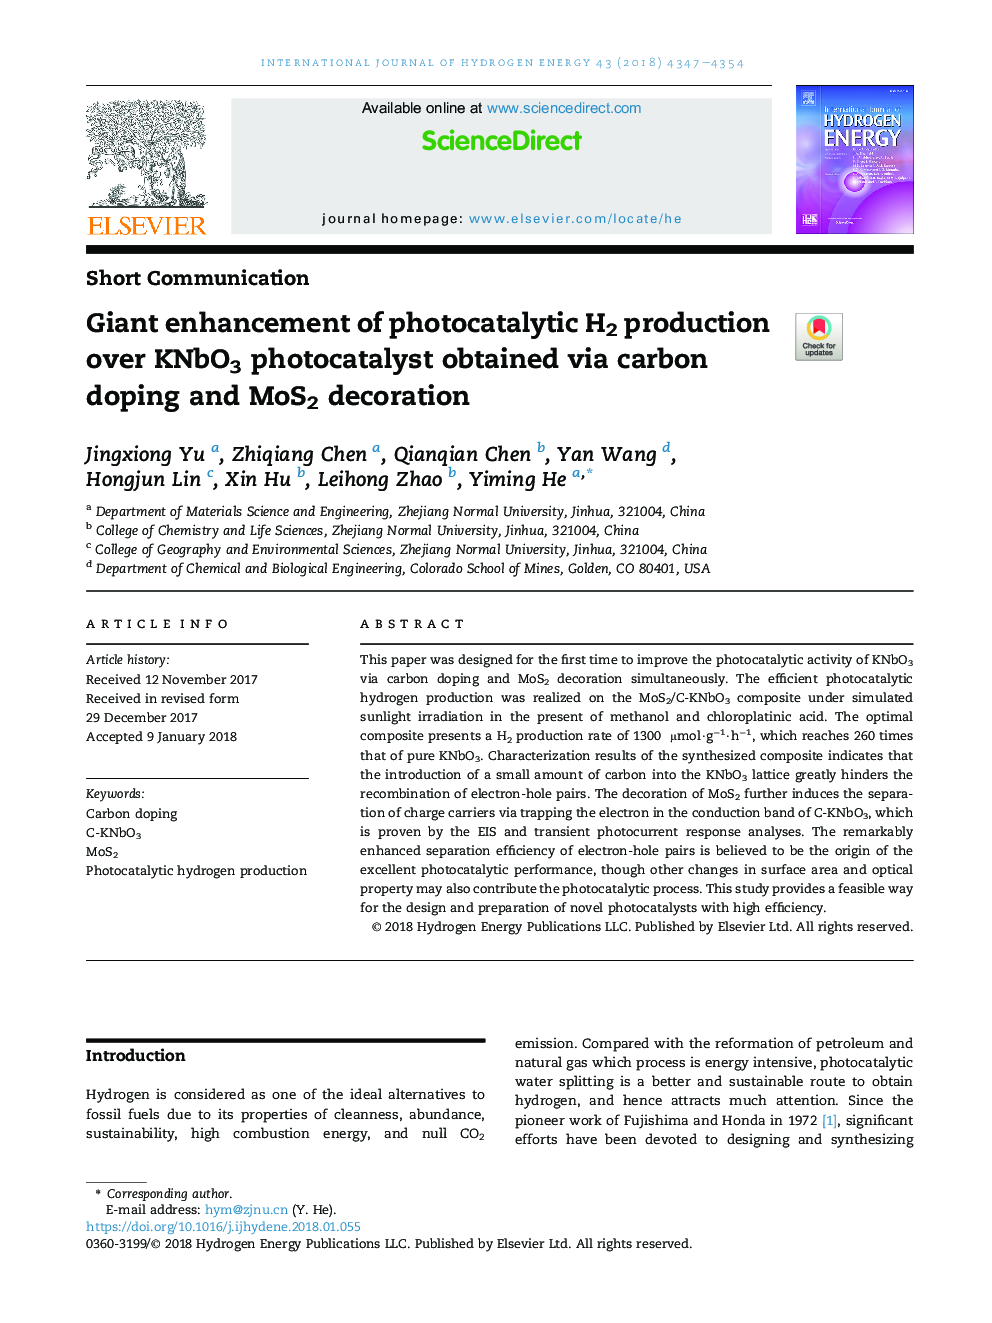 Giant enhancement of photocatalytic H2 production over KNbO3 photocatalyst obtained via carbon doping and MoS2 decoration